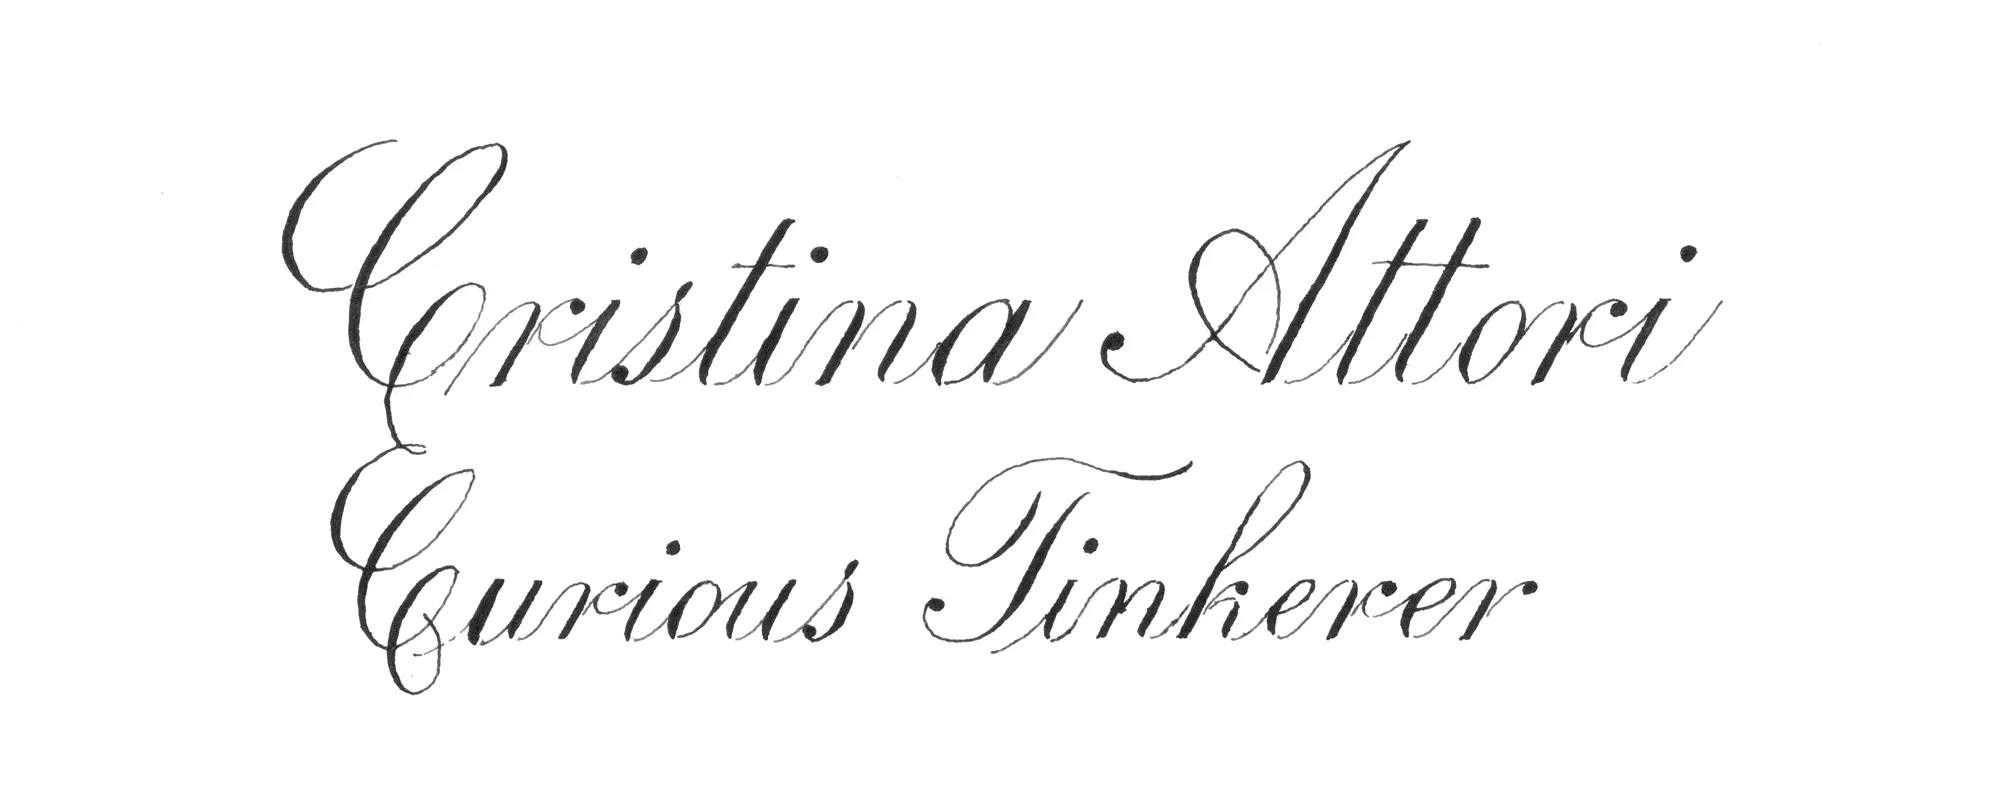 Christina Attori Nameplate Submission from ES 2022.